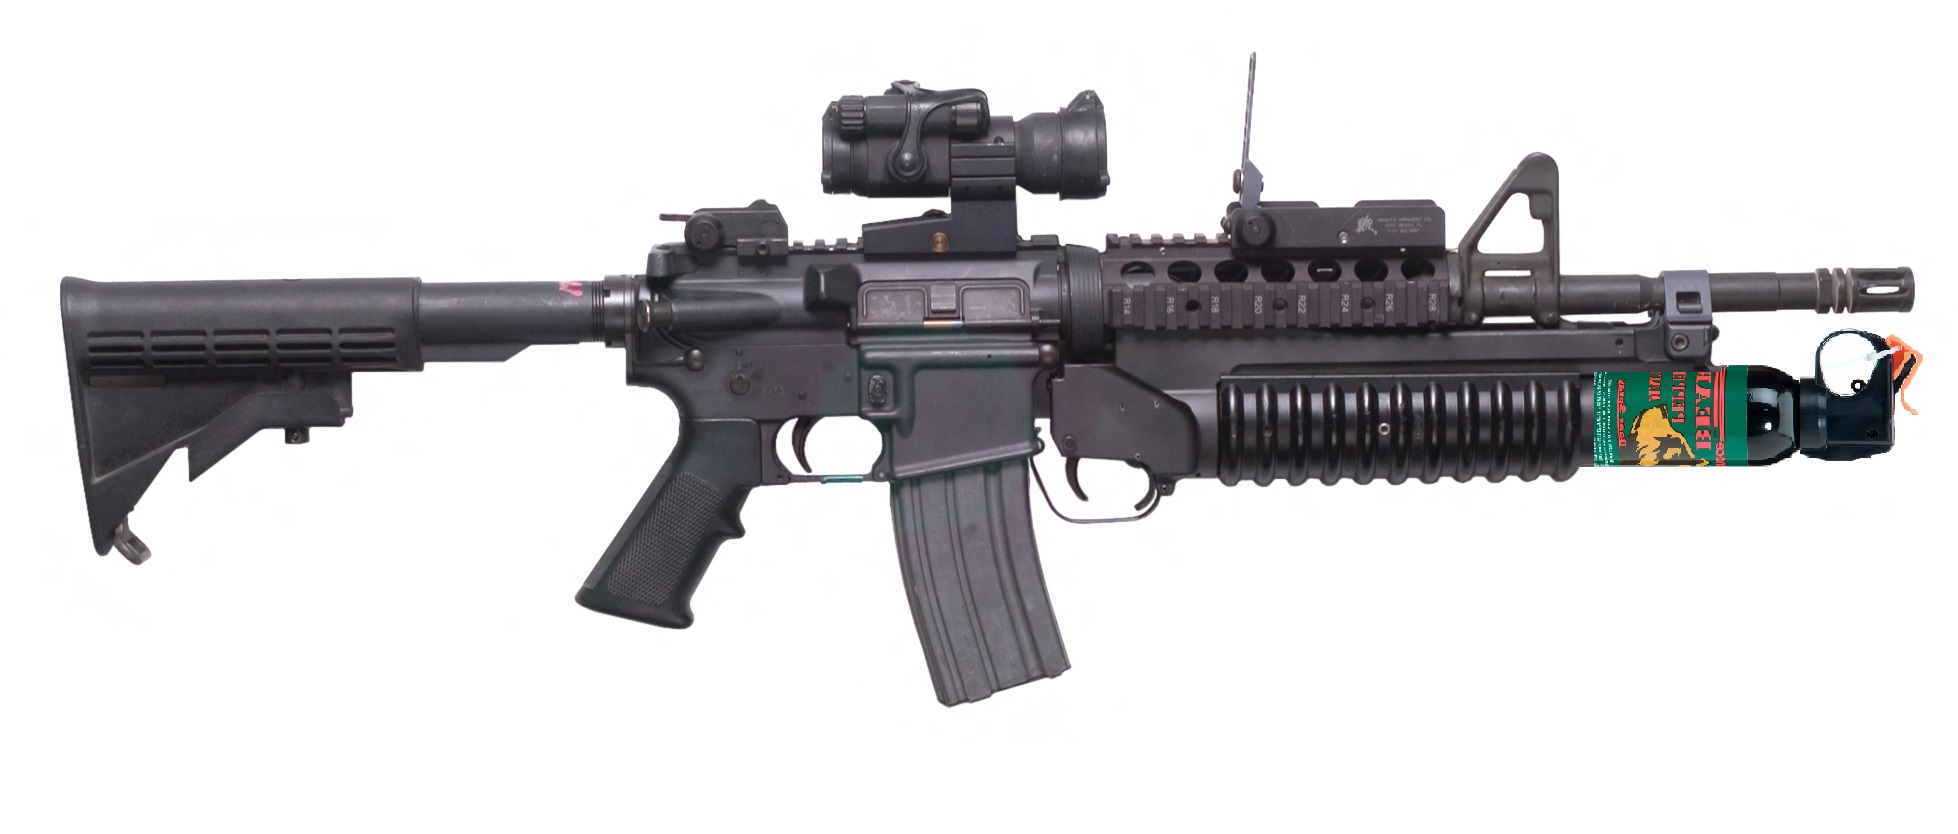 M4_Carbine_with_M203_Grenade_Launcher_(7414626424).jpg